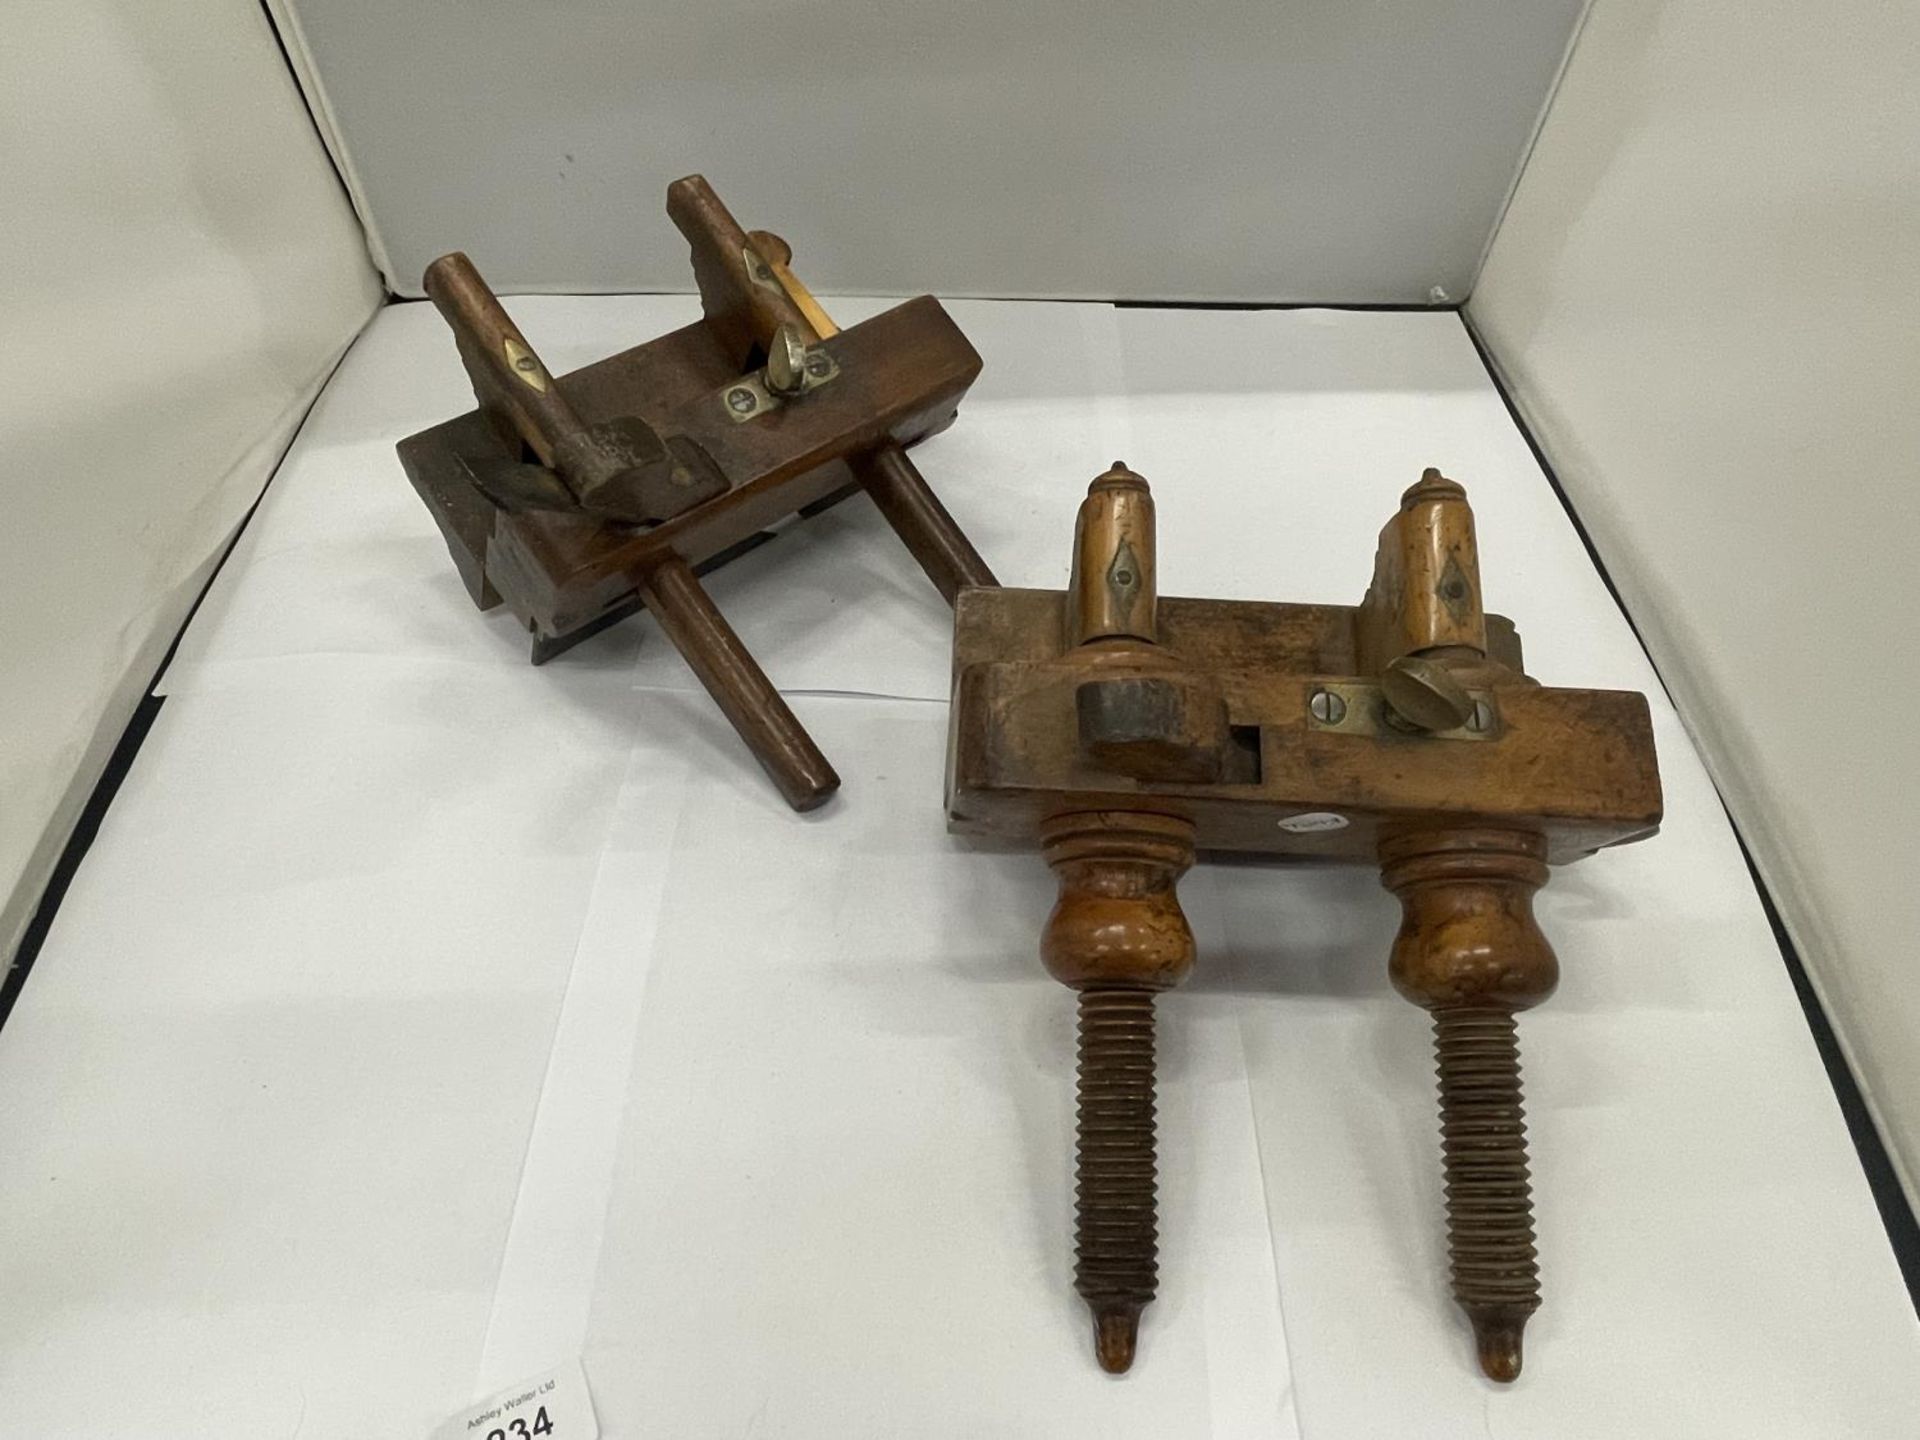 AN ANTIQUE FRUITWOOD PLOUGH PLANE TOGETHER WITH A THUMB SCREW PLOUGH